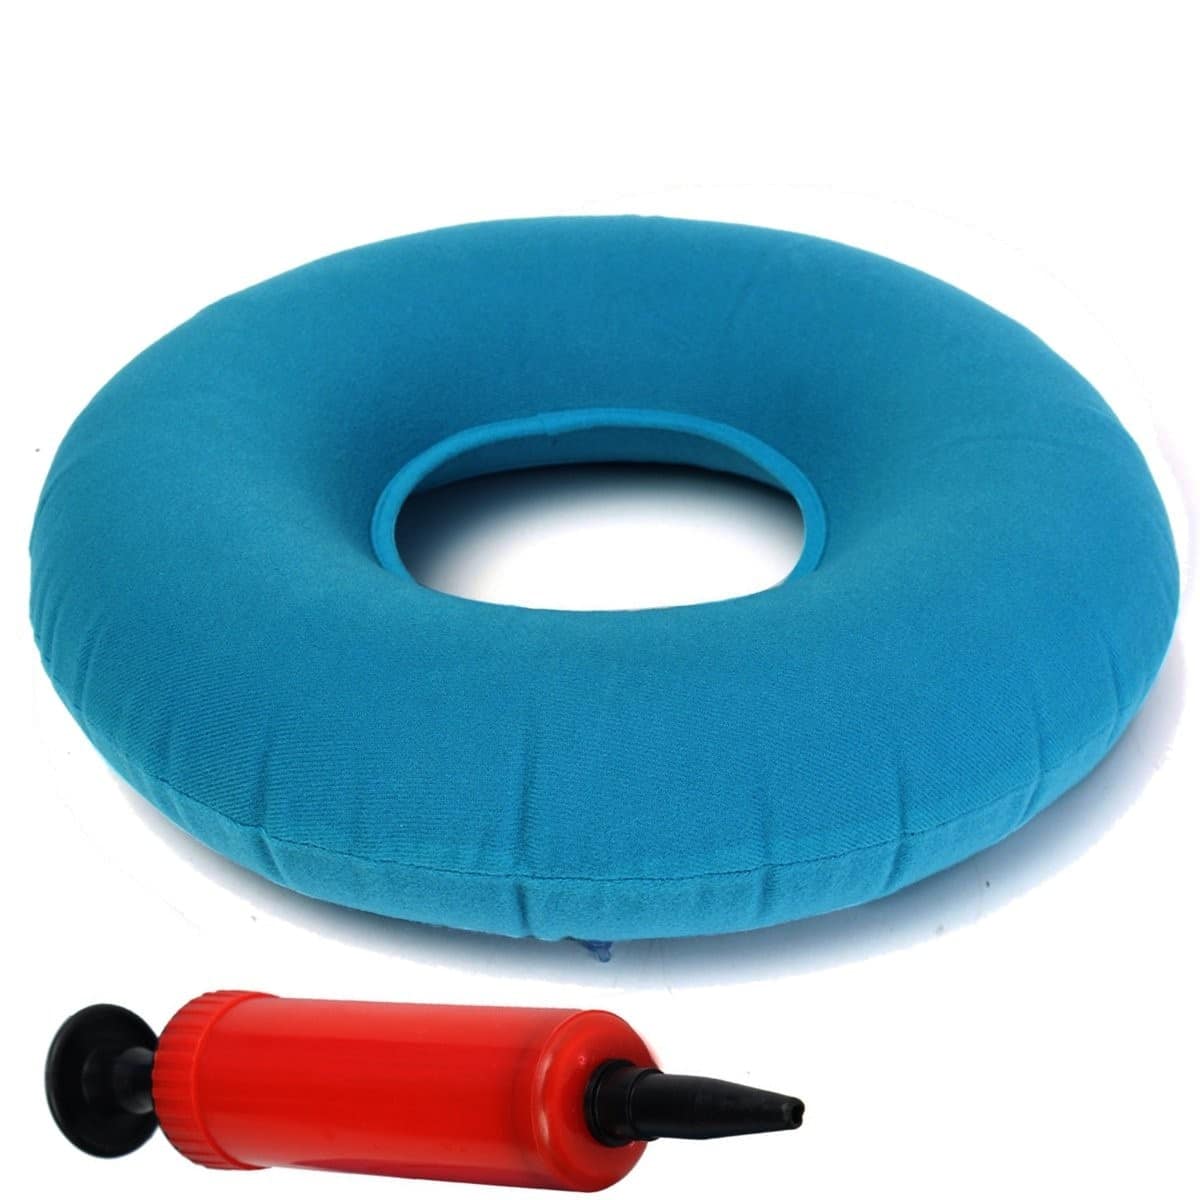 Inflatable Rubber Ring Round Seat Cushion Medical Hemorrhoid Pillow ...